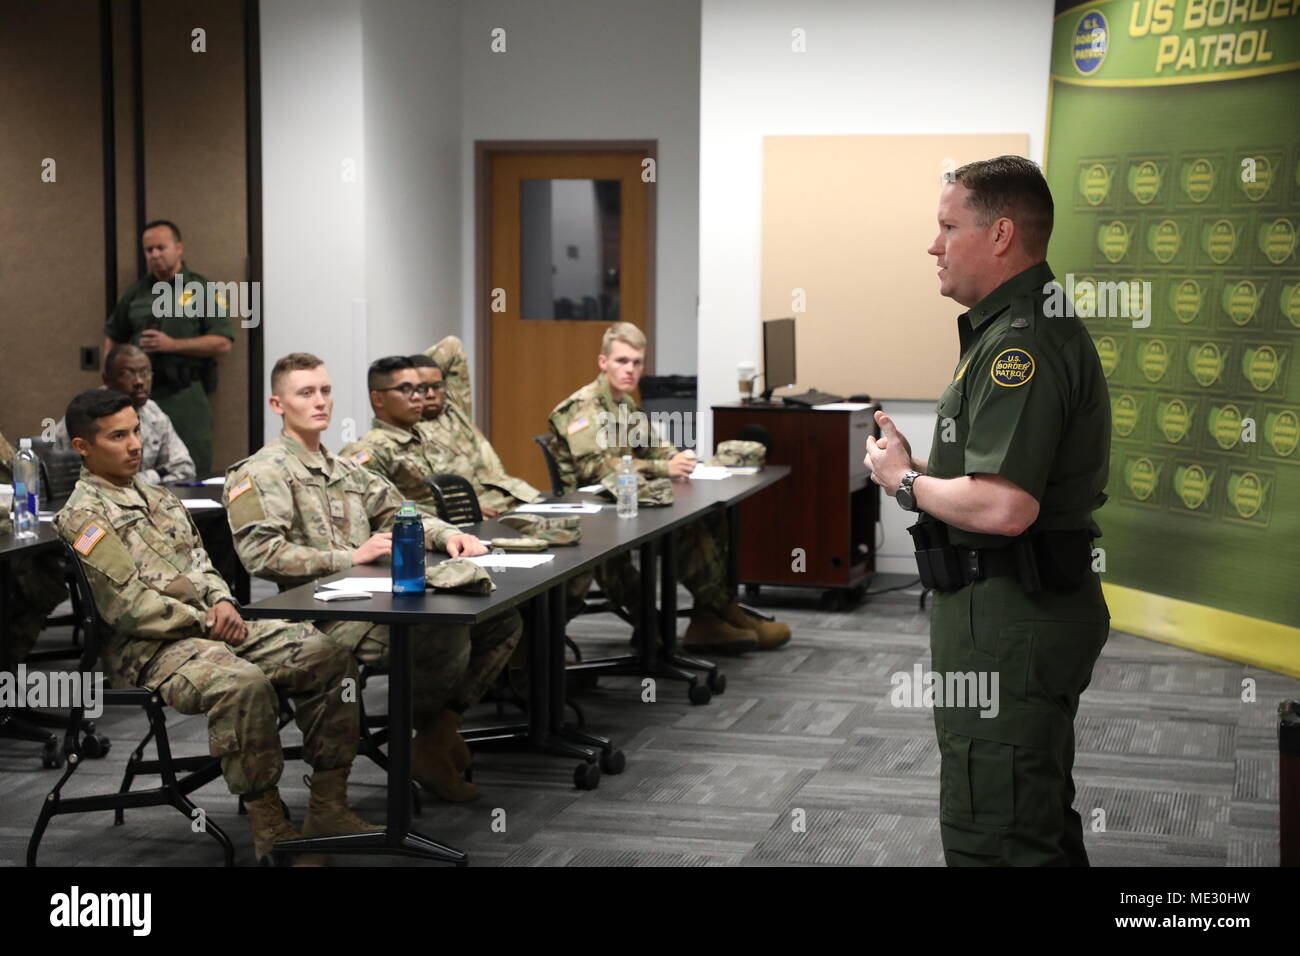 U.S. Border Patrol Deputy Chief Patrol Agent Carl Landrum welcomes National Guard Soldiers who arrived at U.S. Border Patrol Yuma Sector, April 18, 2018.  (Division Chief Travis Darling in background.) Stock Photo